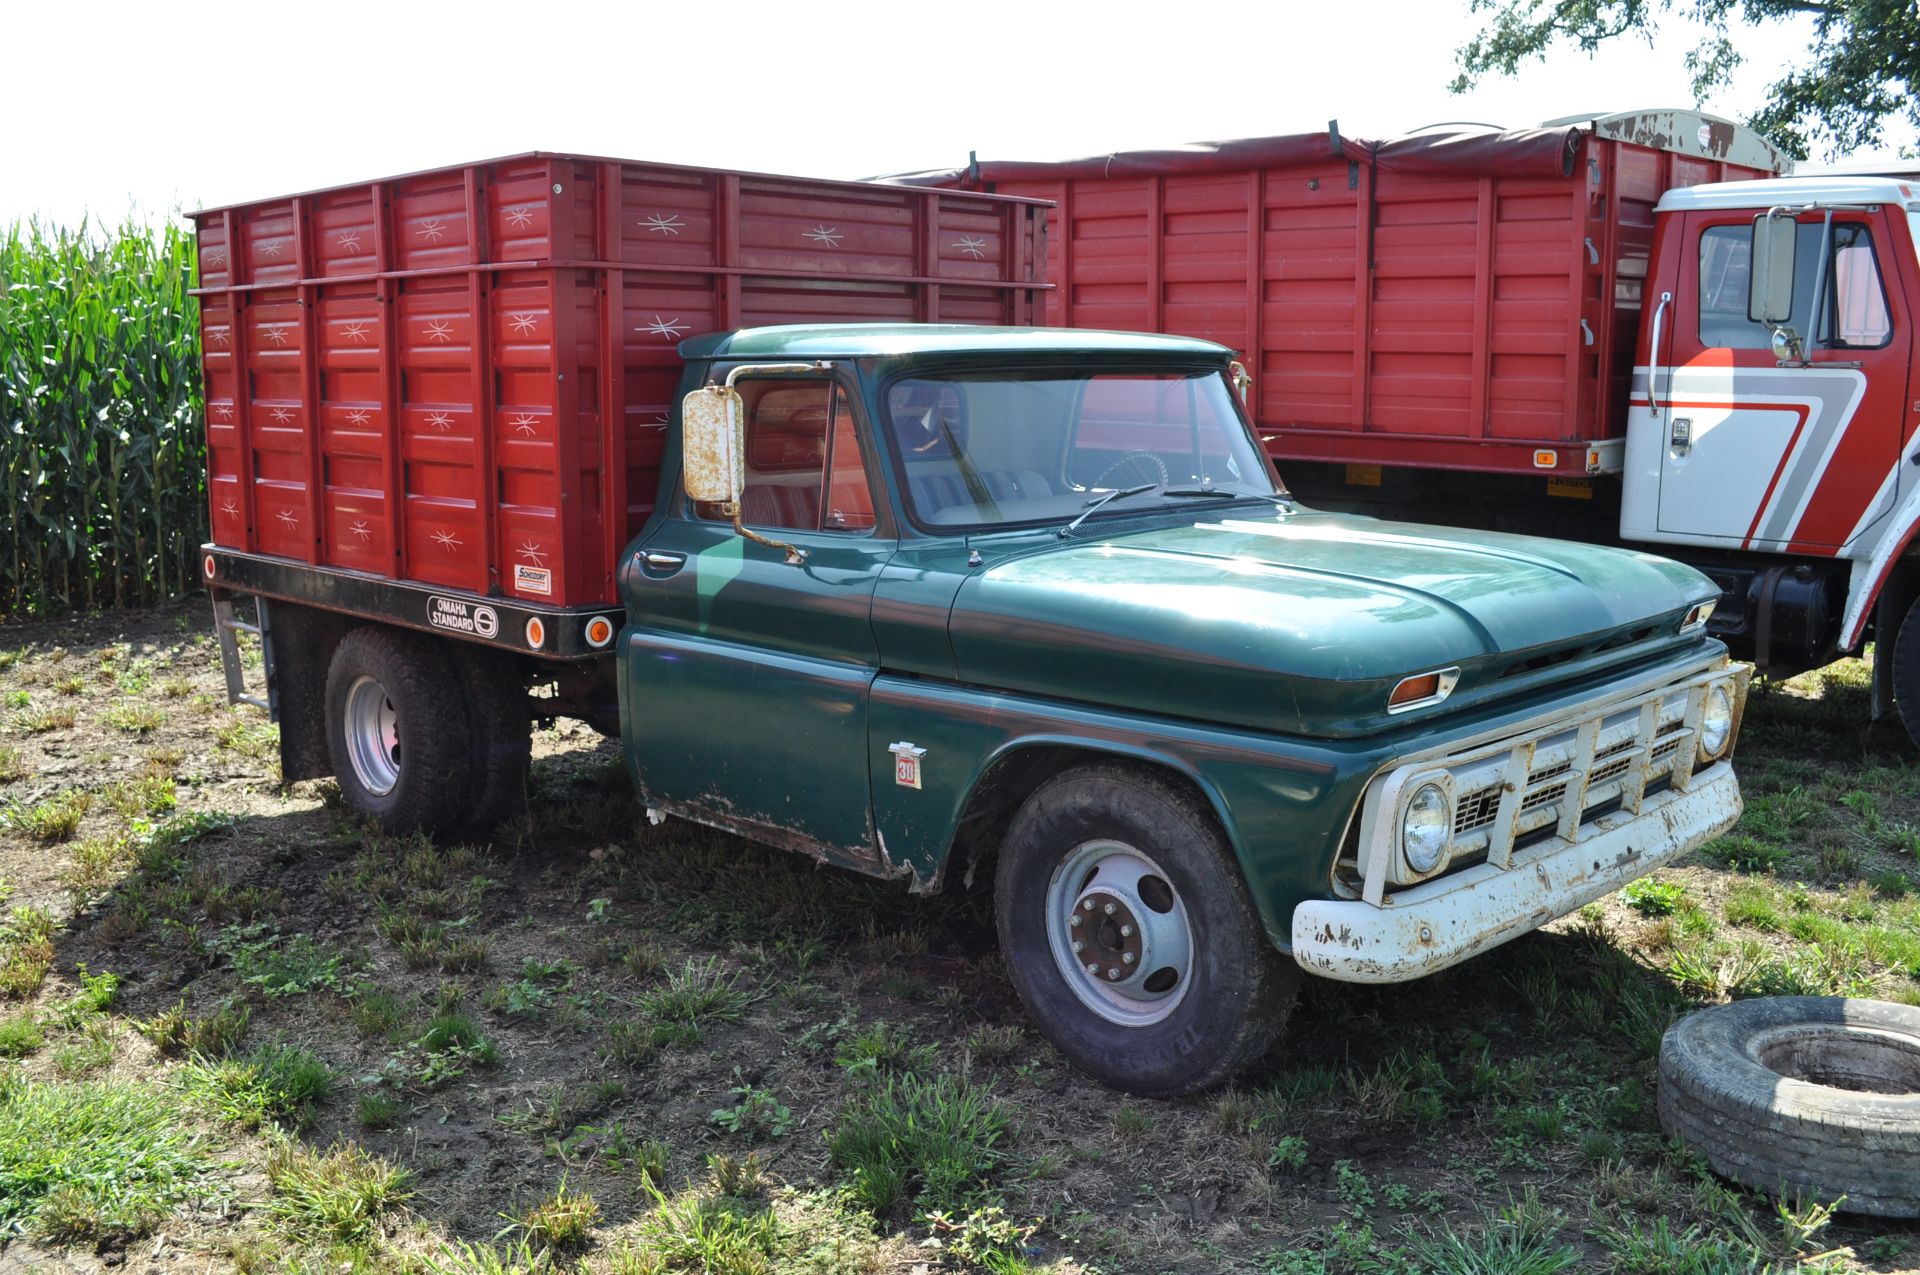 1964 Chevrolet 30 1 ton truck, 230 6 cyl gas engine, 4 spd manual trans, 134” WB, 235/85R16 tires - Image 2 of 20